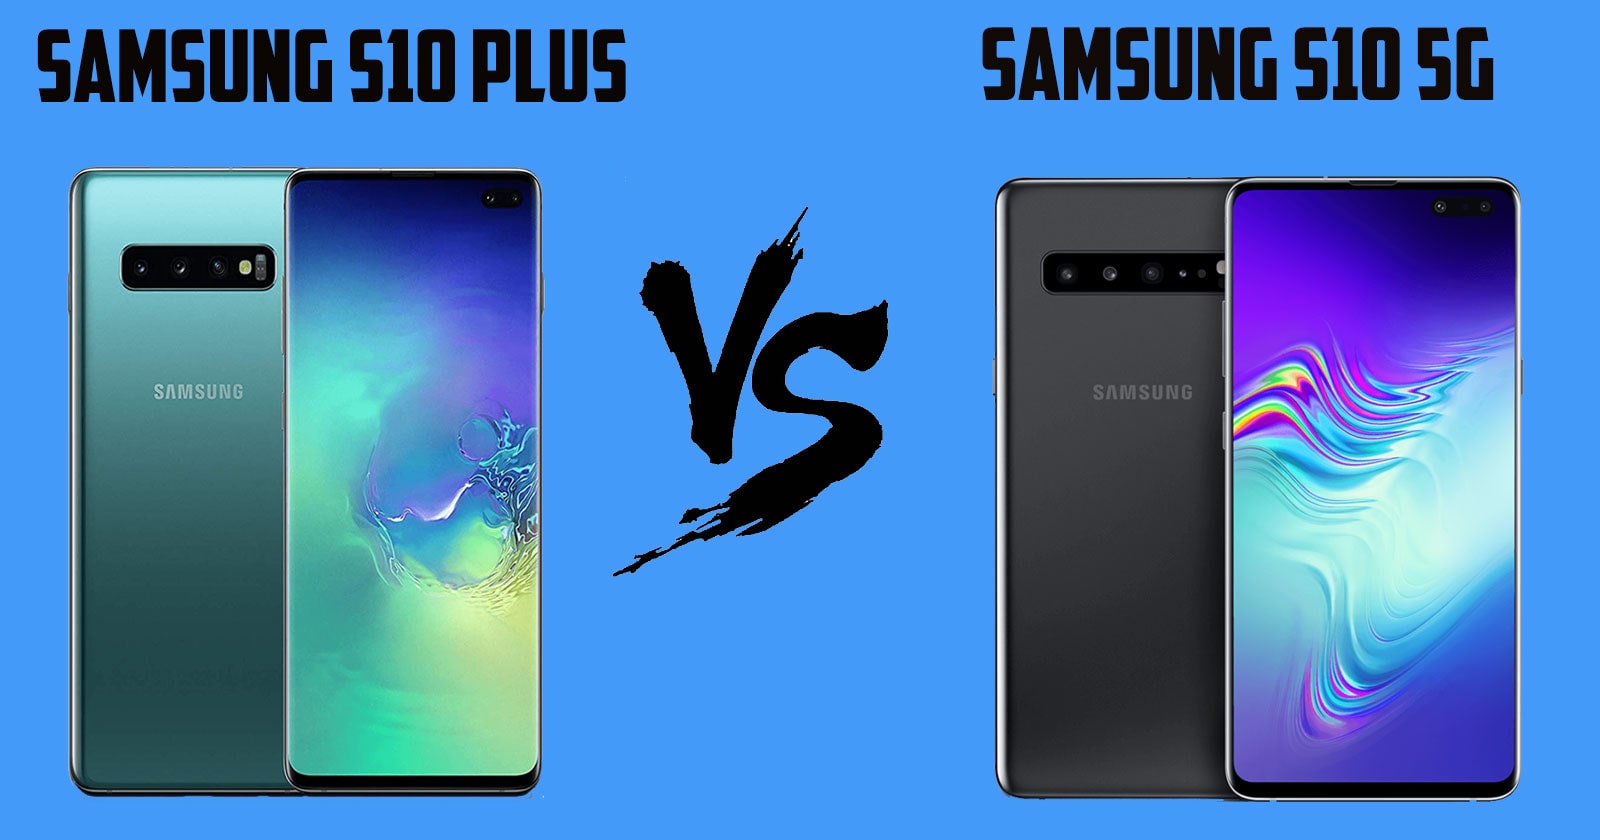 What is the difference between Samsung s10 plus and s10 5g